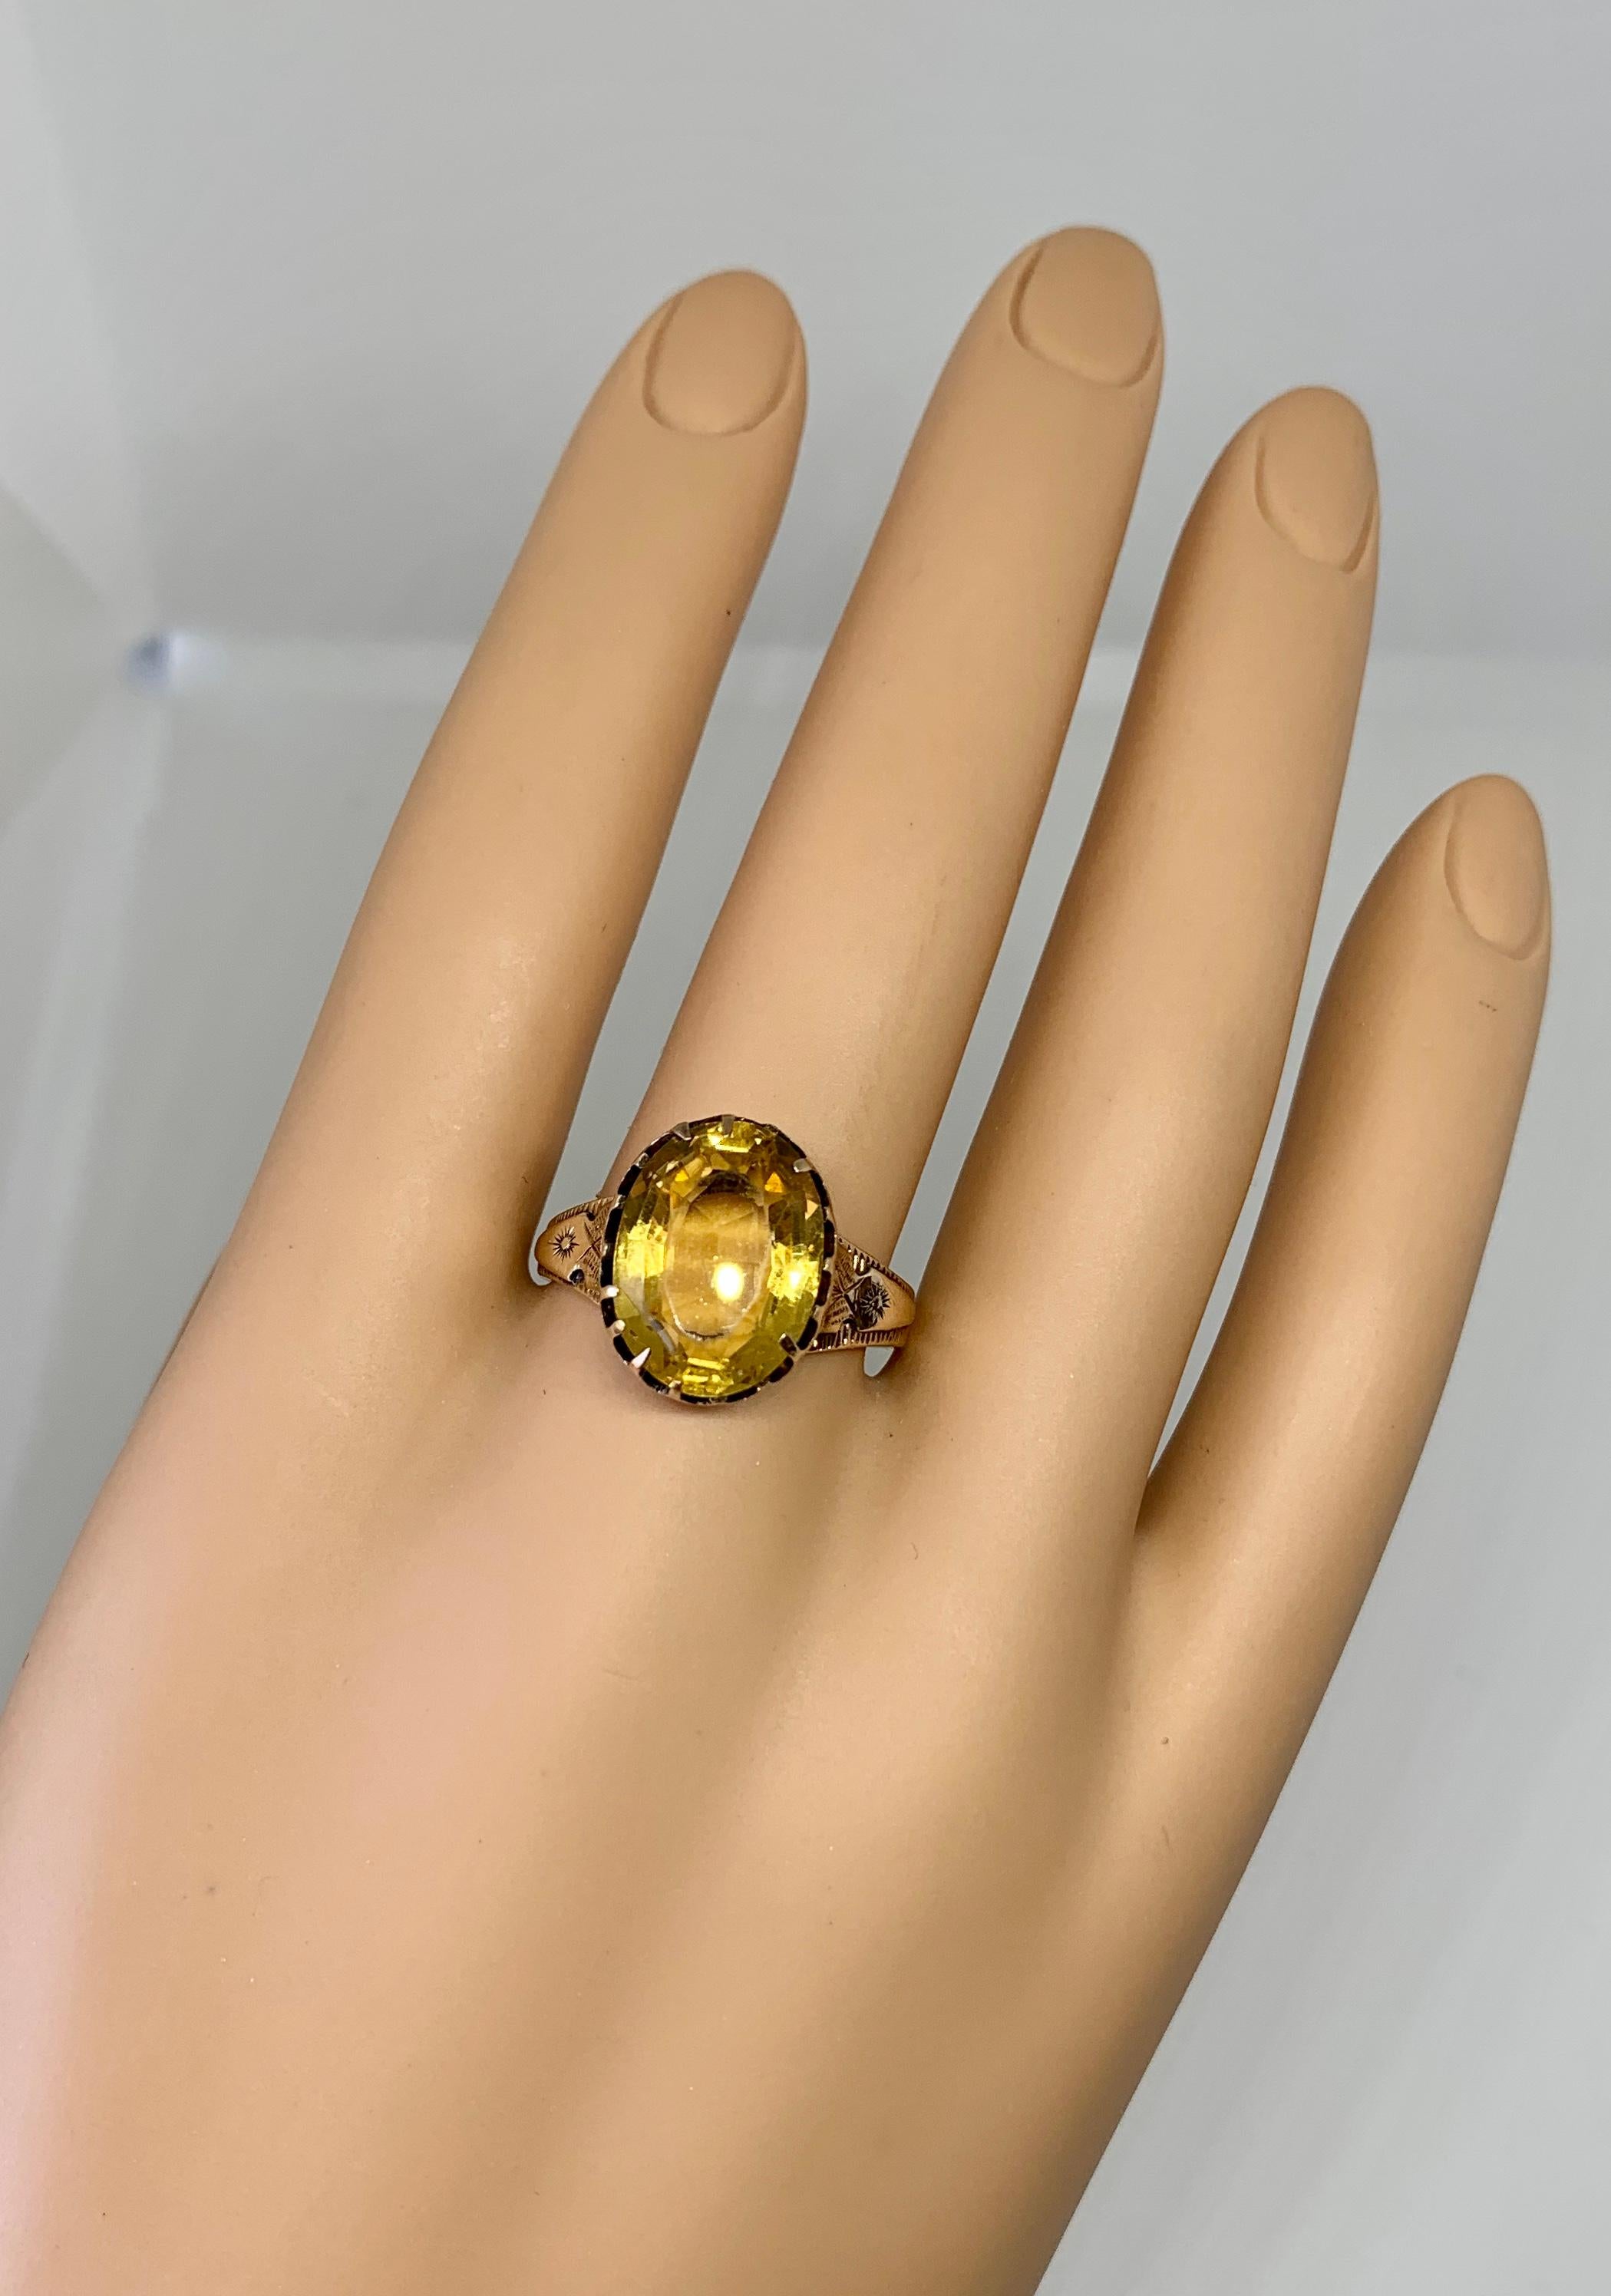 Oval Cut Victorian 5 Carat Citrine Ring Gold Antique Belle Epoque Engraved, 1850 For Sale